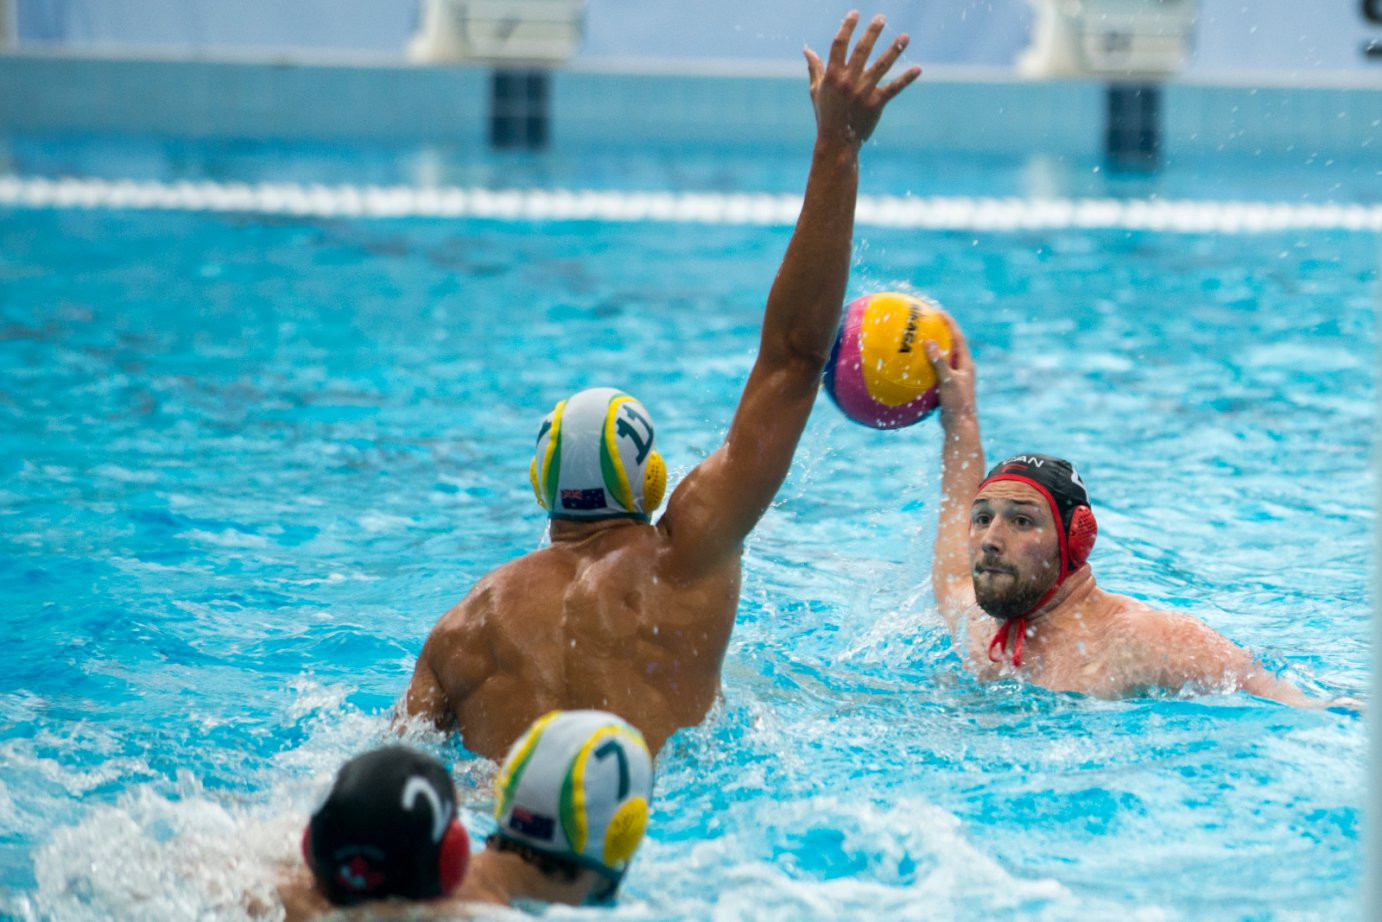 Australia's men failed to grasp the title at the Water Polo World League Intercontinental Cup in Auckland, beaten 9-6 in the final by the United States ©Getty Images